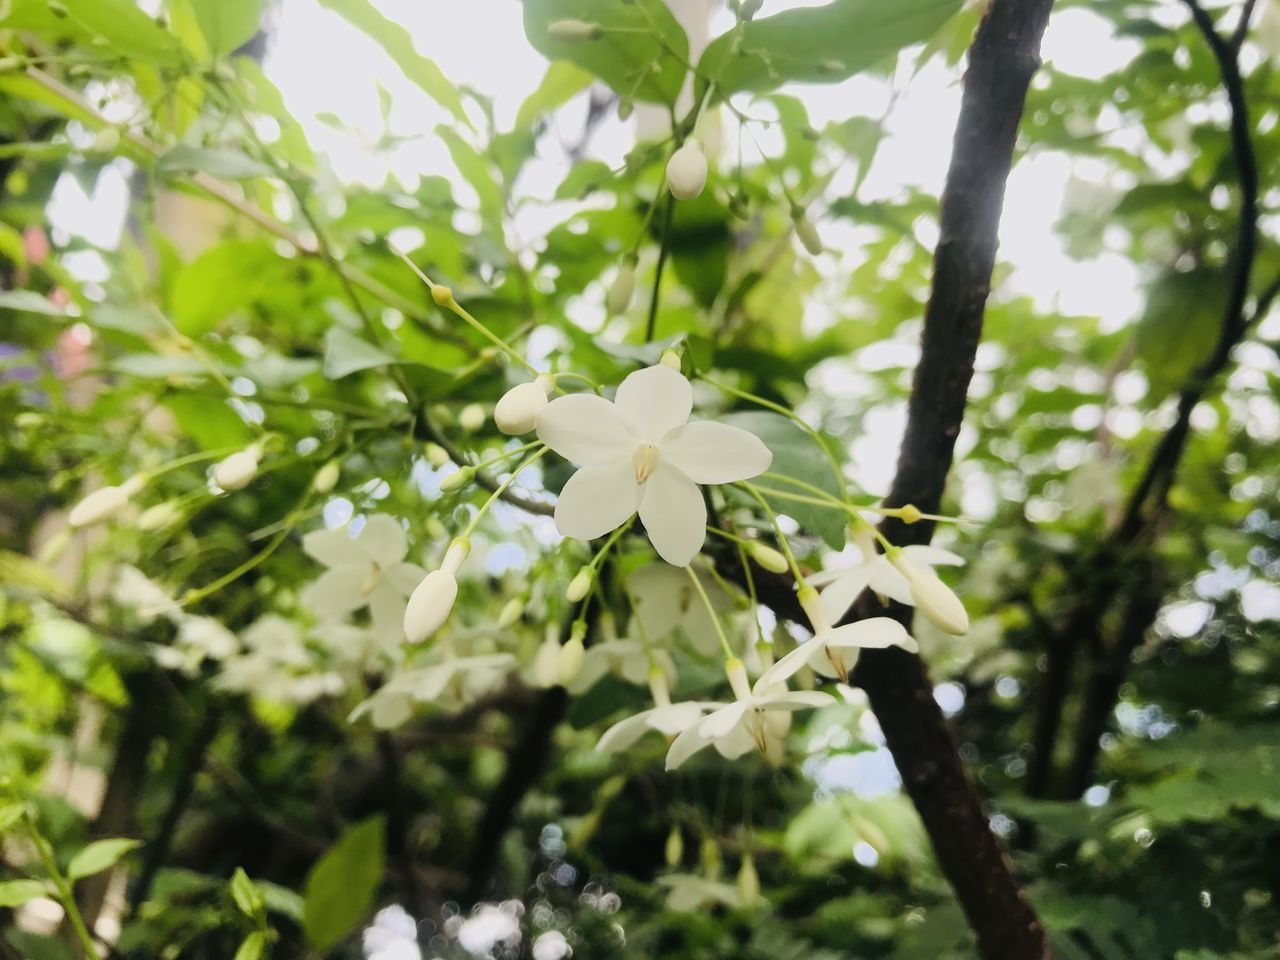 plant, flower, flowering plant, tree, blossom, growth, beauty in nature, green, nature, plant part, leaf, freshness, produce, branch, white, fragility, no people, springtime, outdoors, close-up, day, focus on foreground, sunlight, petal, flower head, food and drink, botany, food, inflorescence, fruit tree, shrub